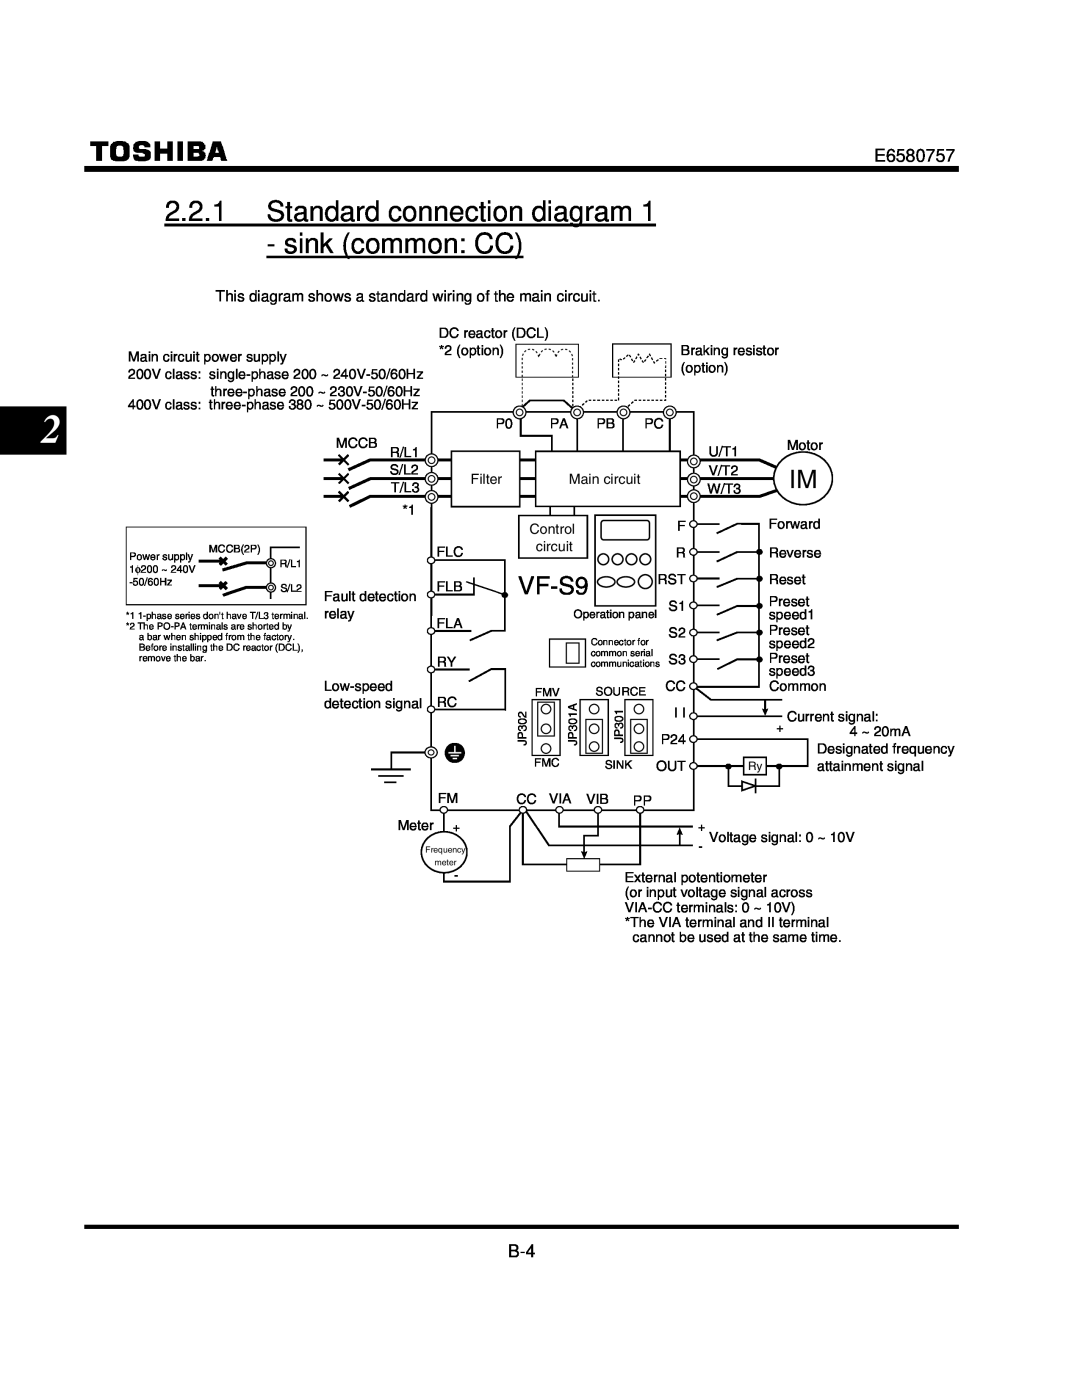 Toshiba VF-S9 manual Standard connection diagram 1 - sink common CC 